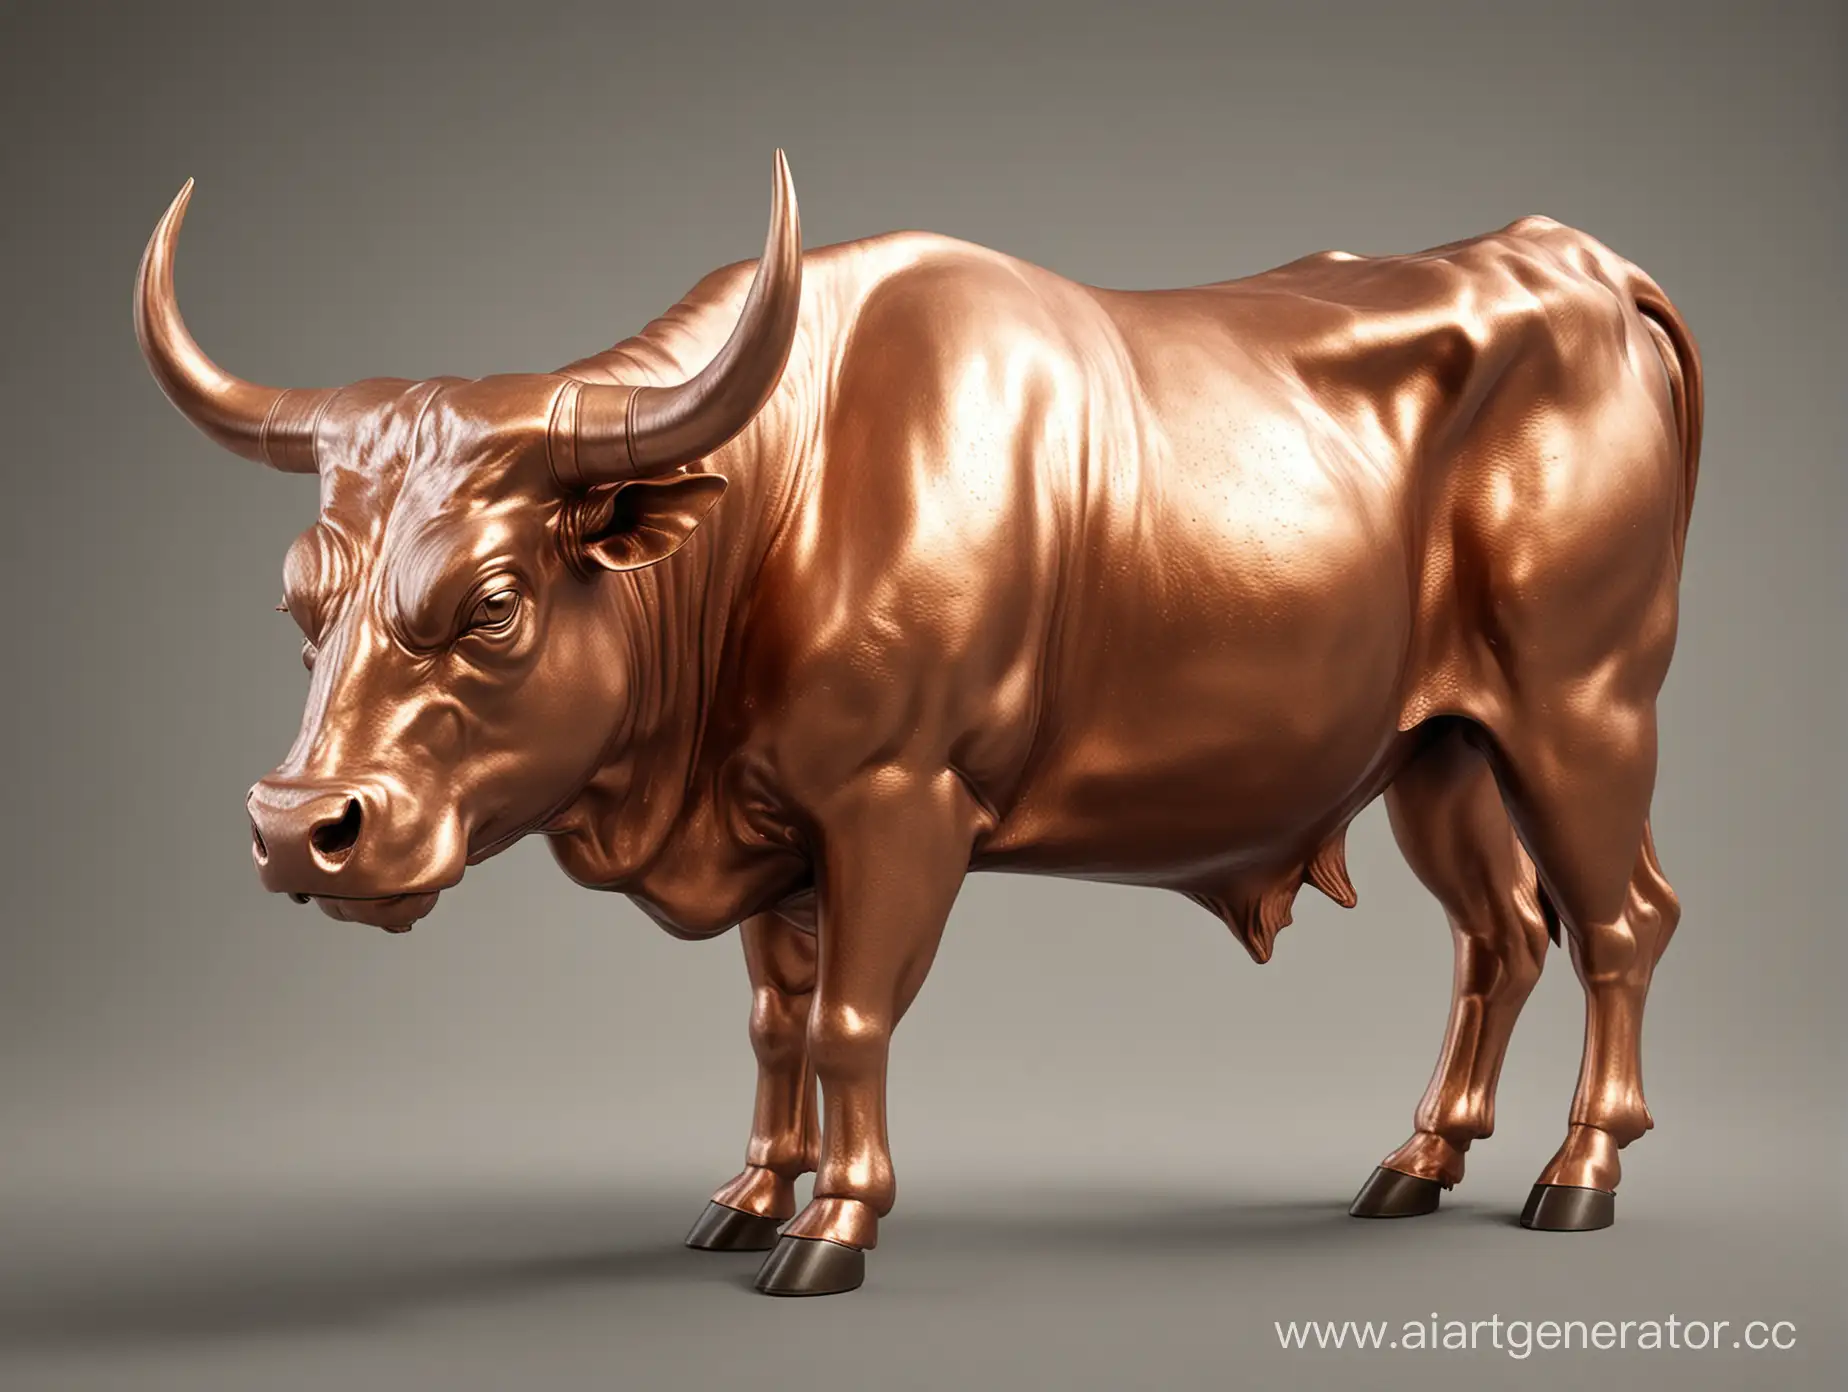 Copper-Bull-Sculpture-priced-at-1488